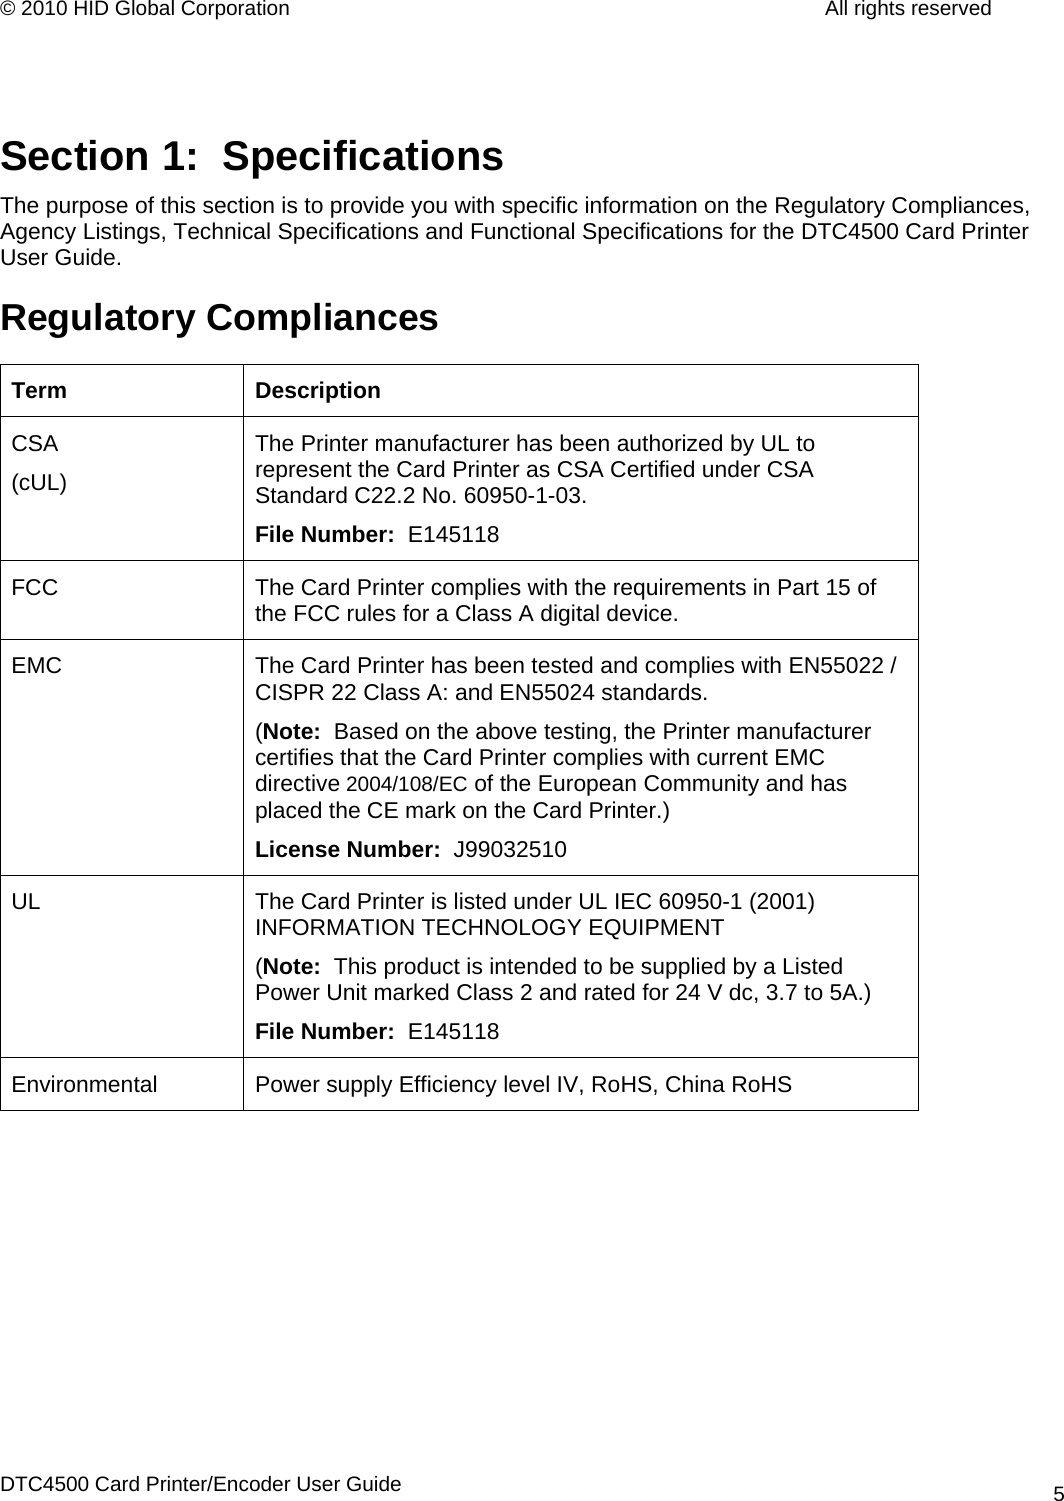 © 2010 HID Global Corporation         All rights reserved   Section 1:  Specifications The purpose of this section is to provide you with specific information on the Regulatory Compliances, Agency Listings, Technical Specifications and Functional Specifications for the DTC4500 Card Printer User Guide. Regulatory Compliances Term Description CSA (cUL) The Printer manufacturer has been authorized by UL to represent the Card Printer as CSA Certified under CSA Standard C22.2 No. 60950-1-03.  File Number:  E145118 FCC  The Card Printer complies with the requirements in Part 15 of the FCC rules for a Class A digital device.  EMC  The Card Printer has been tested and complies with EN55022 / CISPR 22 Class A: and EN55024 standards.  (Note:  Based on the above testing, the Printer manufacturer certifies that the Card Printer complies with current EMC directive 2004/108/EC of the European Community and has placed the CE mark on the Card Printer.)  License Number:  J99032510 UL  The Card Printer is listed under UL IEC 60950-1 (2001) INFORMATION TECHNOLOGY EQUIPMENT (Note:  This product is intended to be supplied by a Listed Power Unit marked Class 2 and rated for 24 V dc, 3.7 to 5A.) File Number:  E145118 Environmental  Power supply Efficiency level IV, RoHS, China RoHS  DTC4500 Card Printer/Encoder User Guide 5